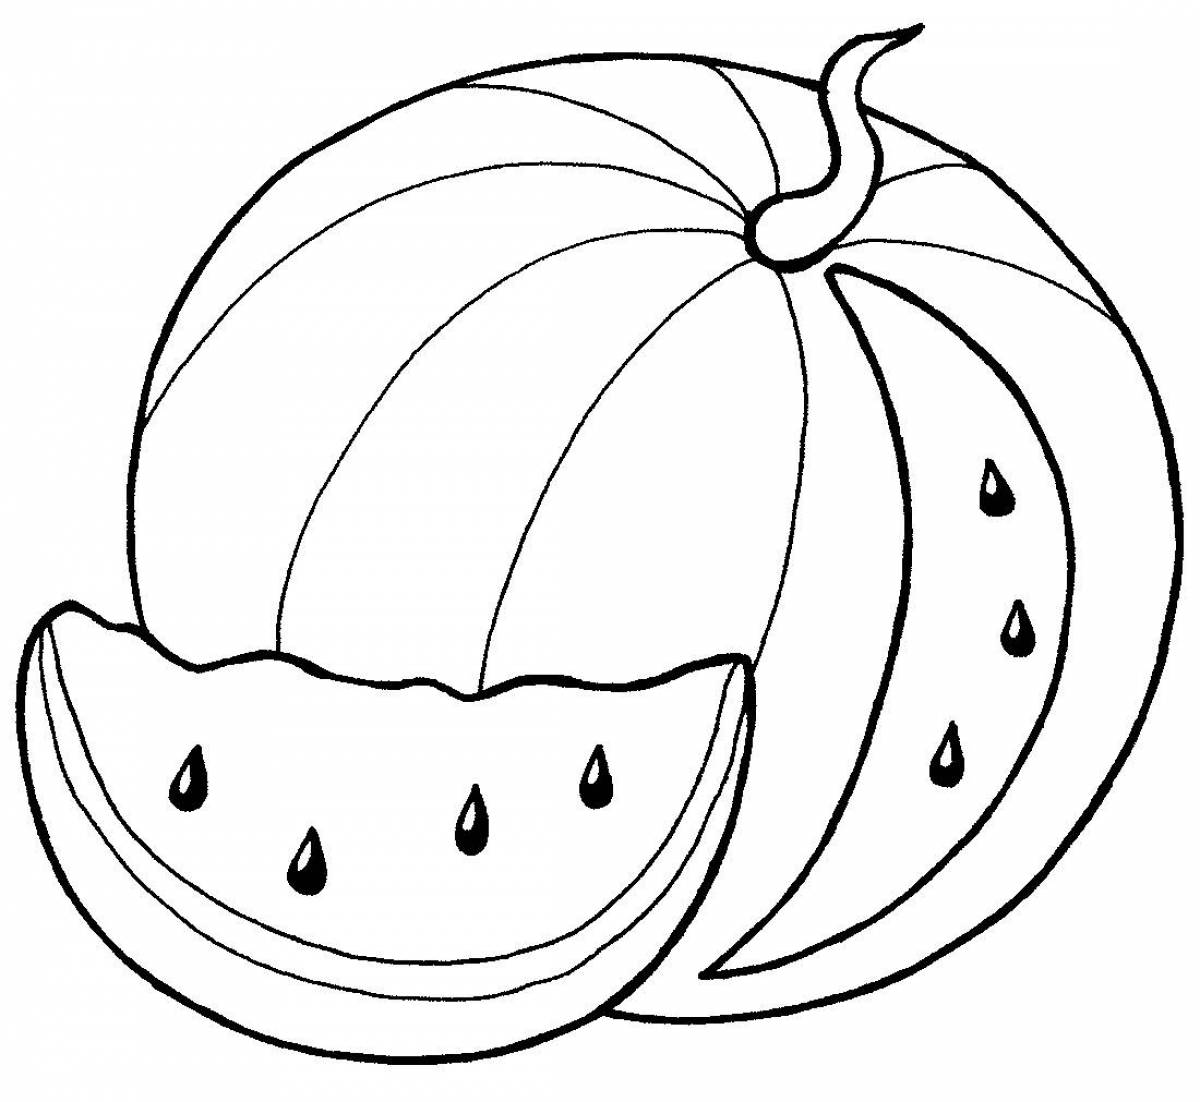 Watermelon coloring book for kids